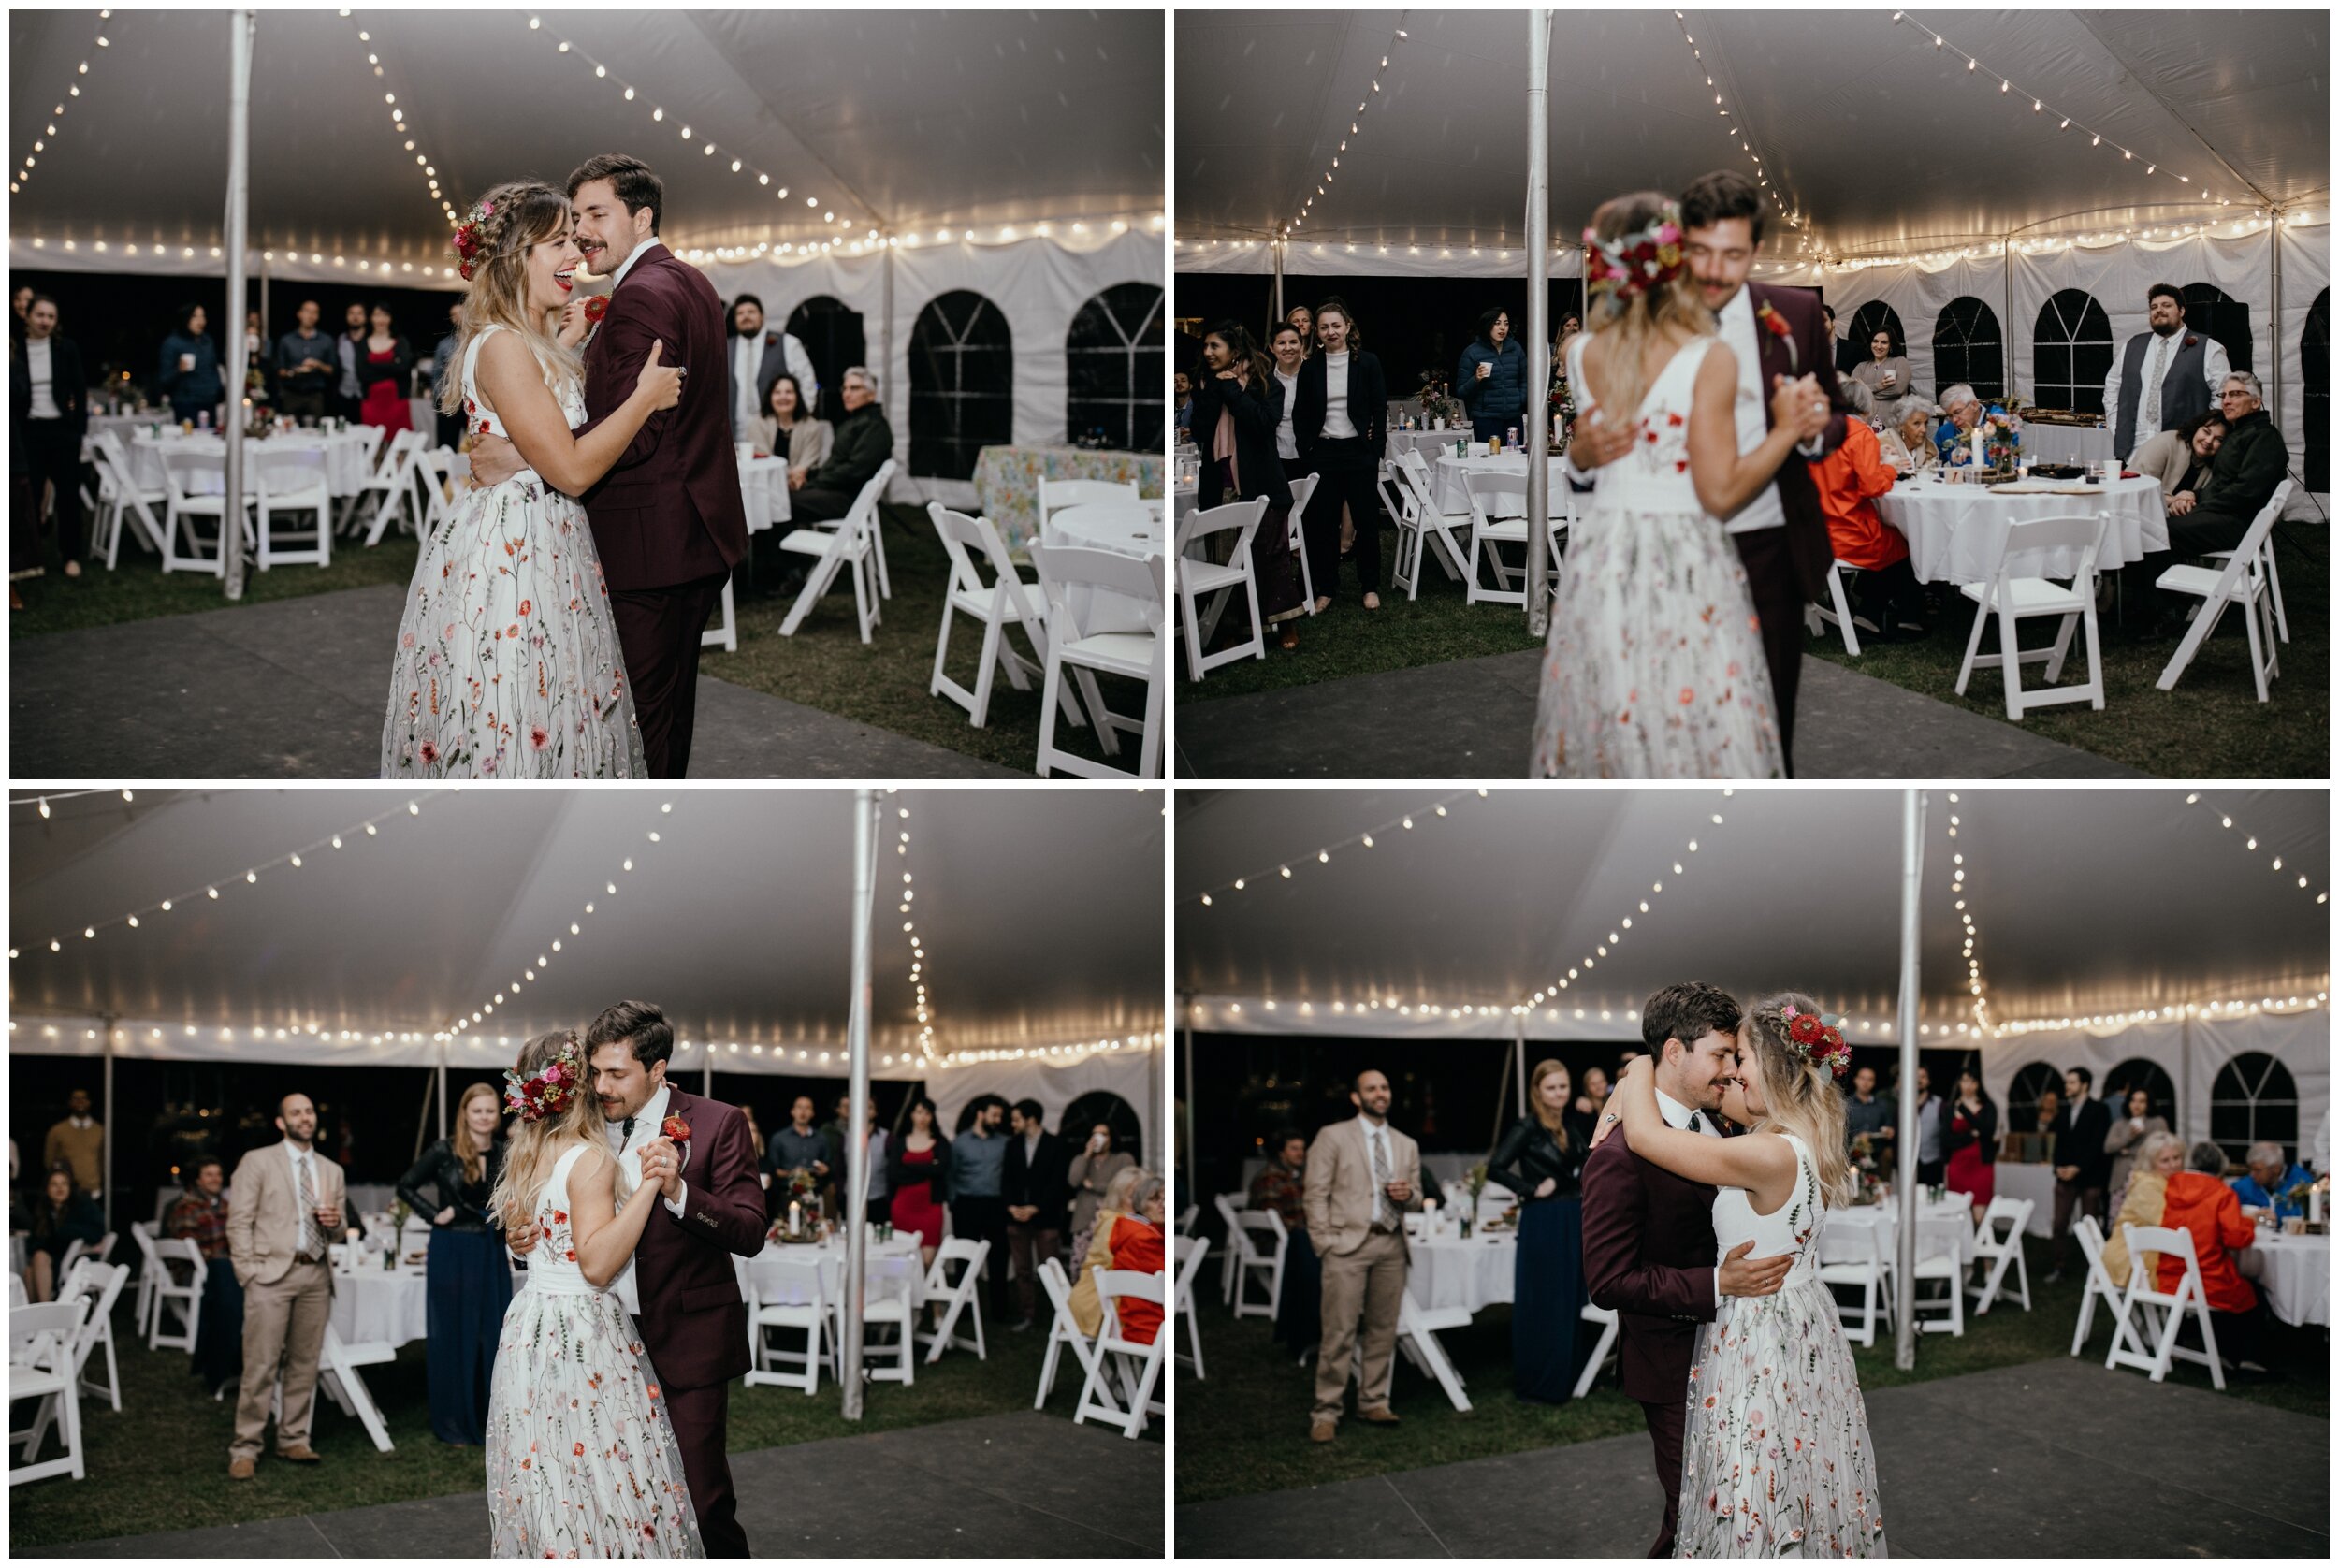 Bride and groom first dance during whimsical summer camp wedding